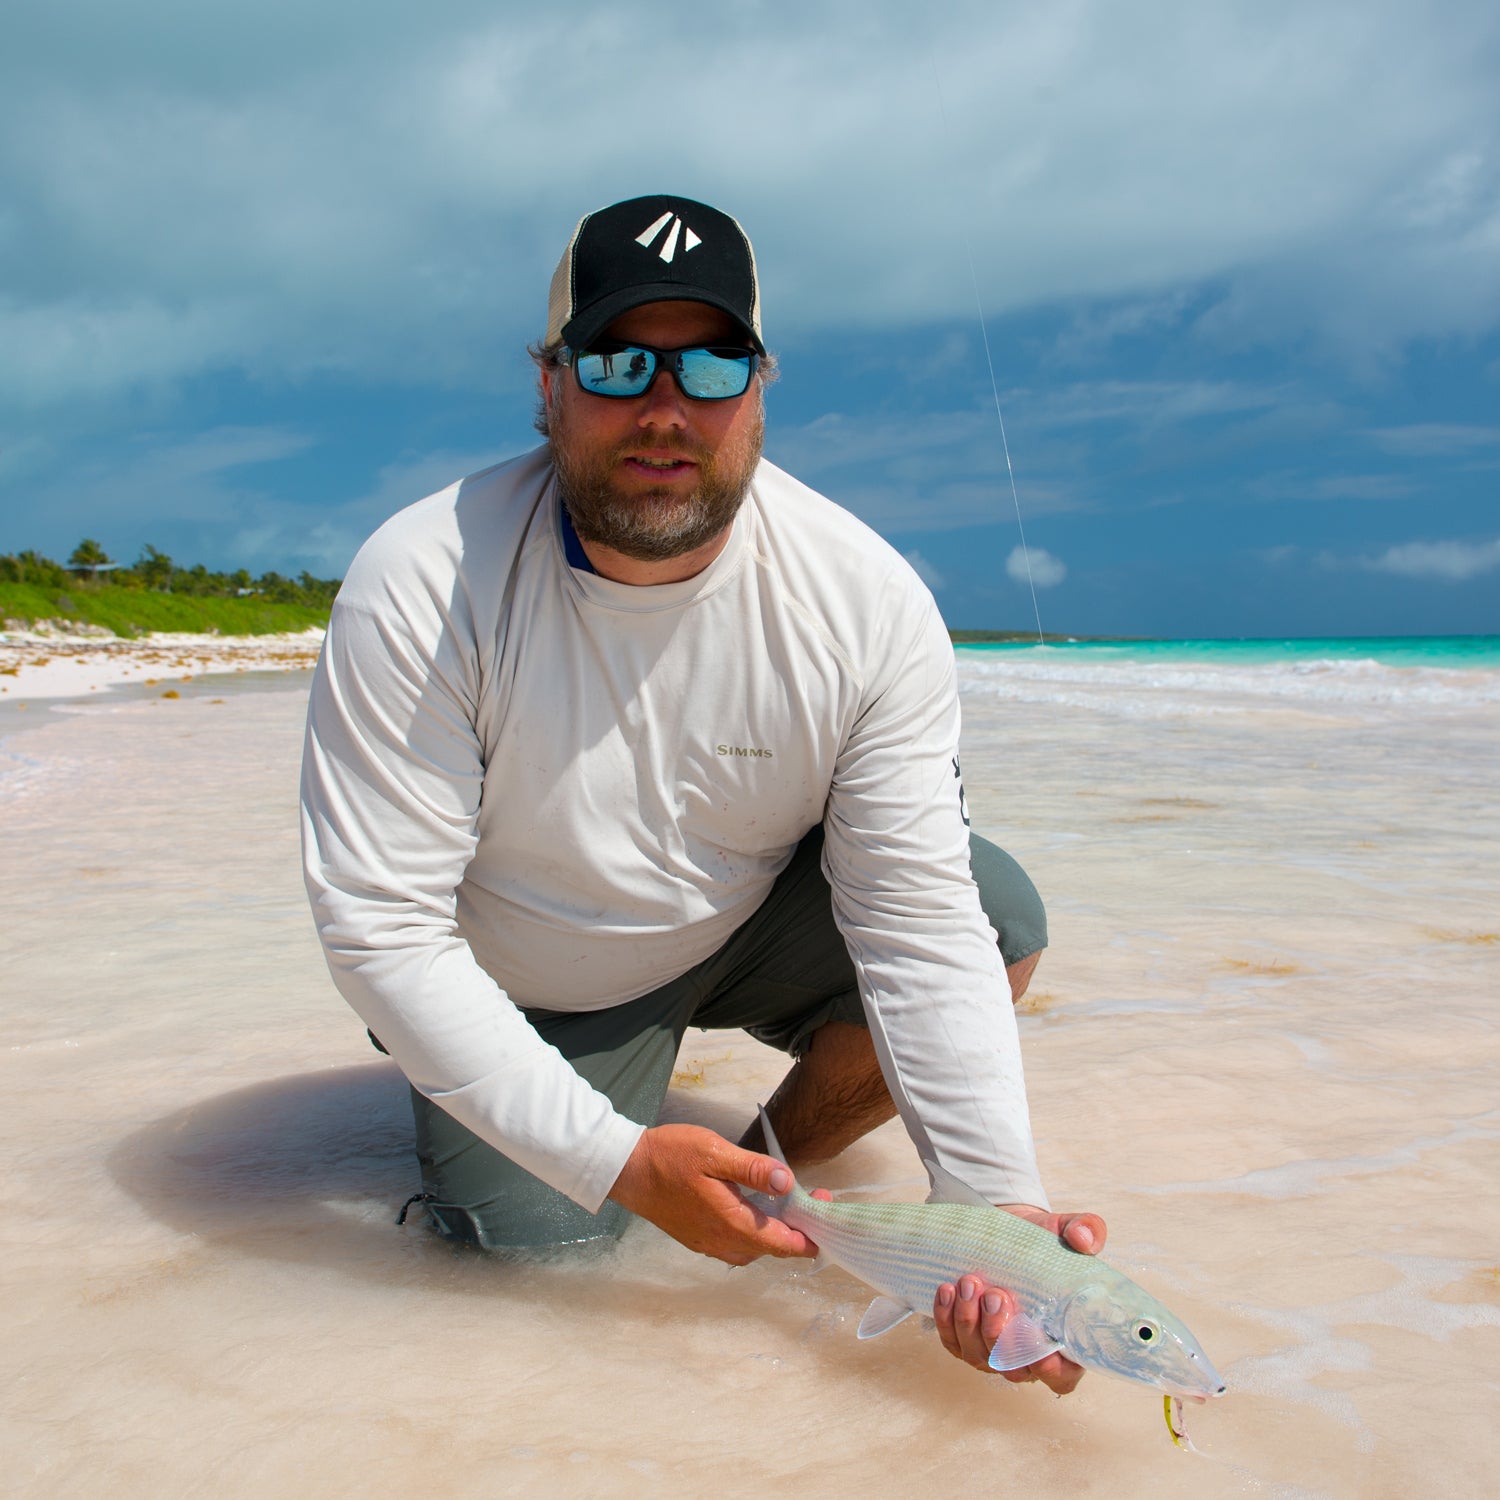 Fly Fishing Guide: Here's What You Need To Know